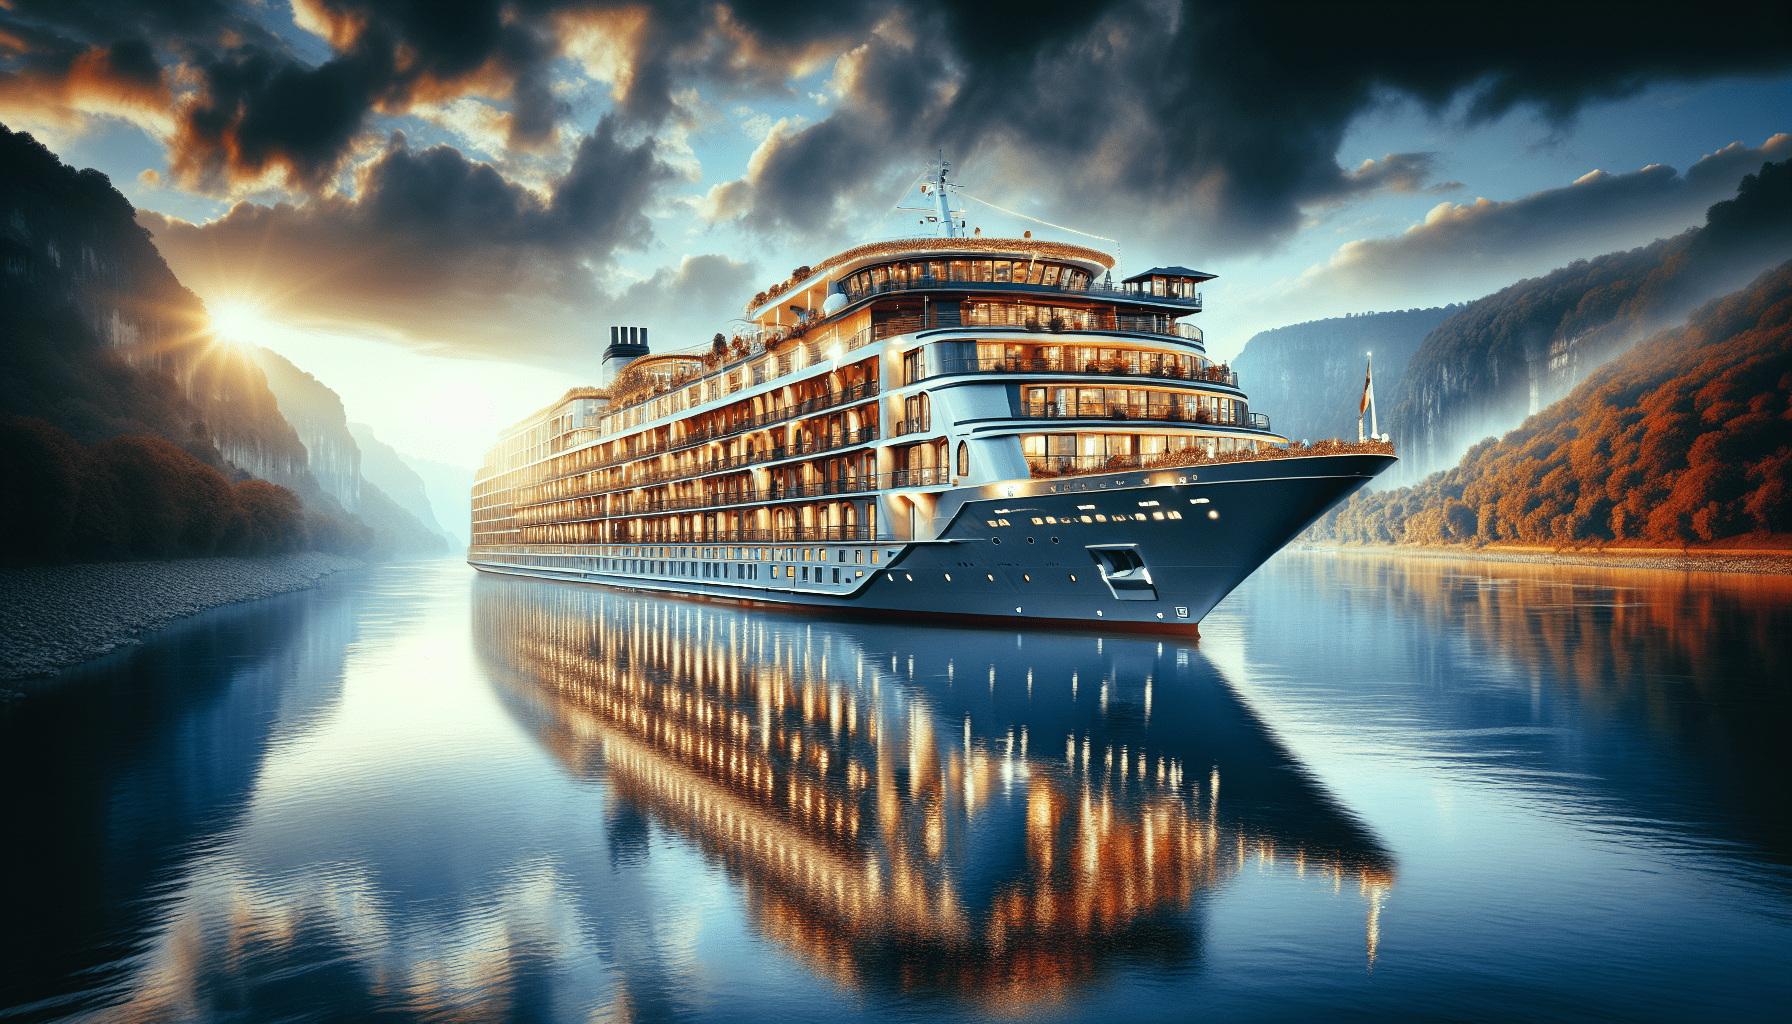 What Is The Largest River Cruise Ship?